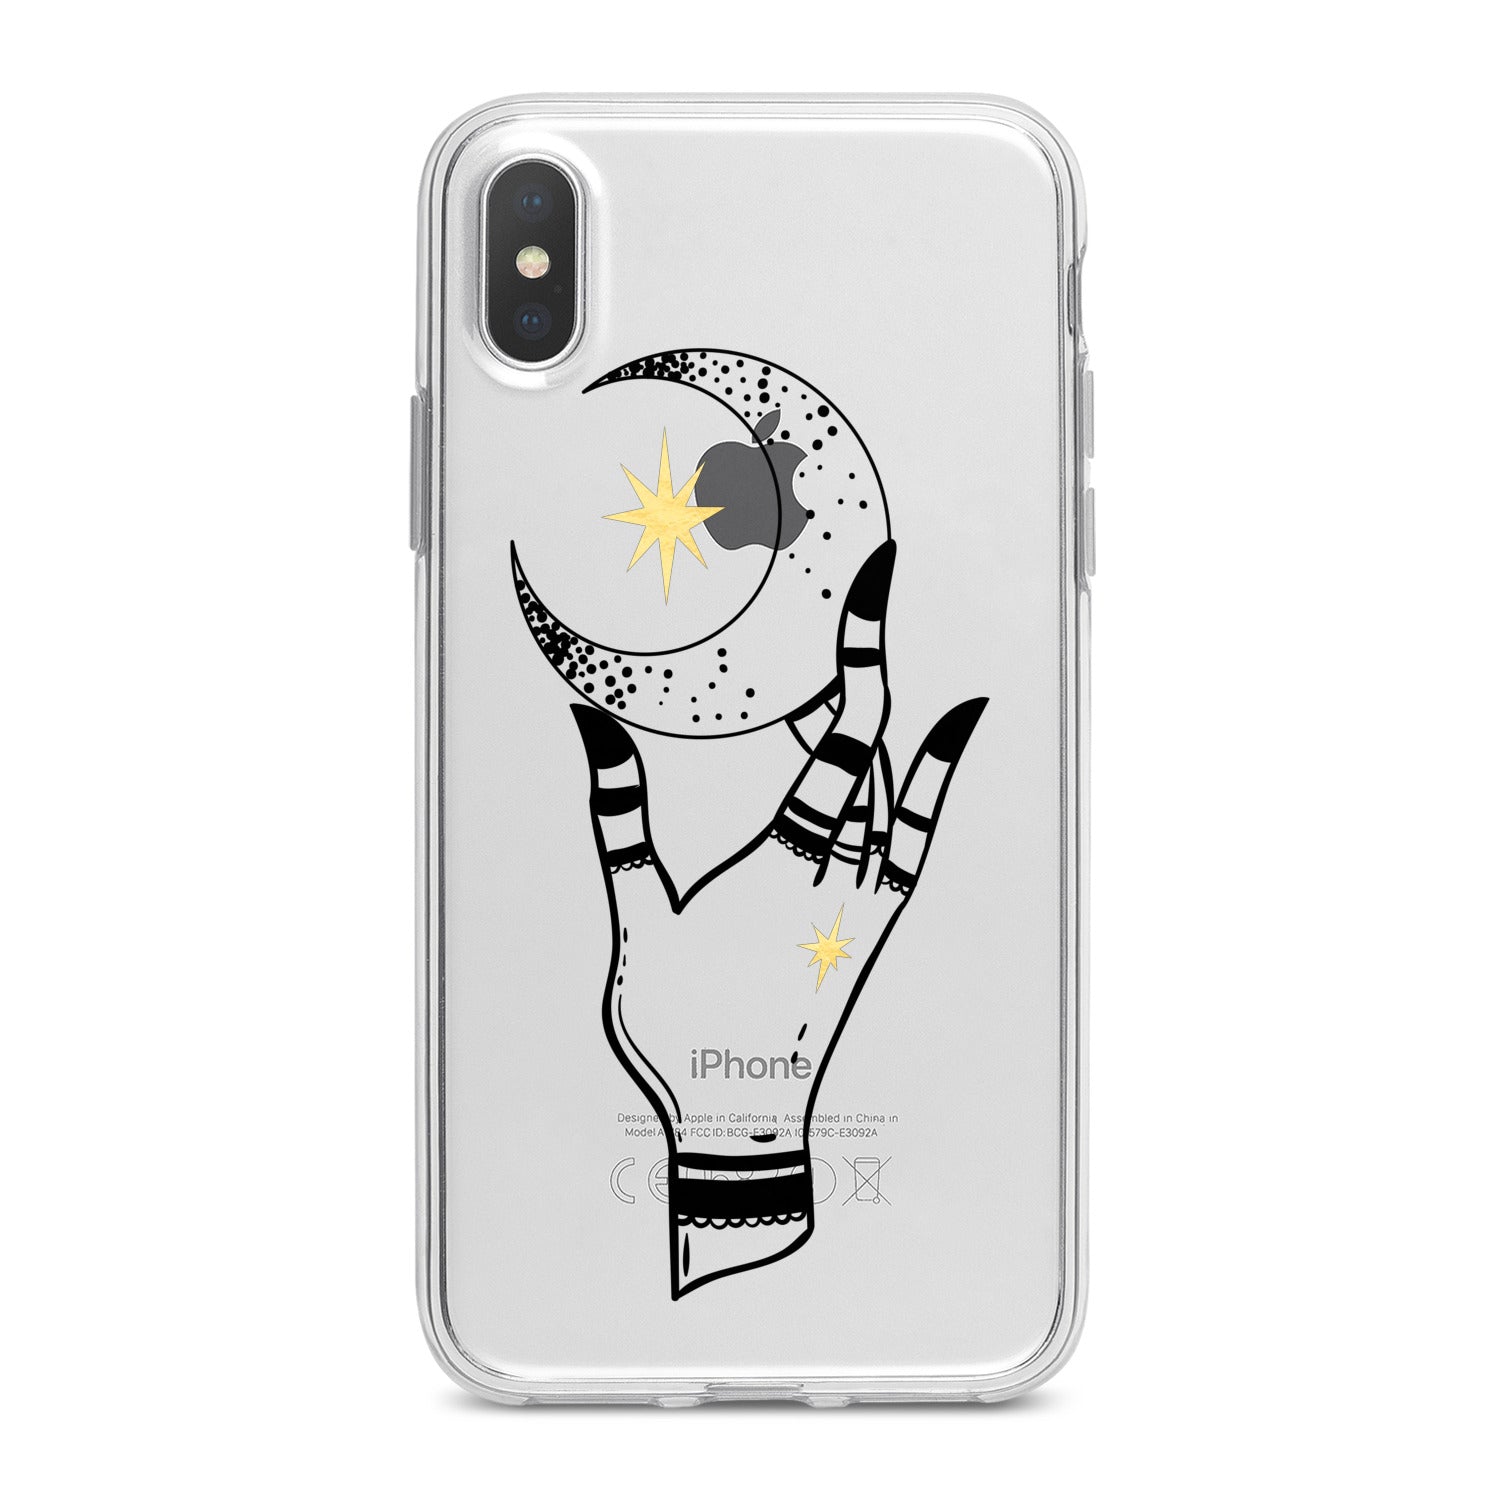 Lex Altern Touch Moon Art Phone Case for your iPhone & Android phone.